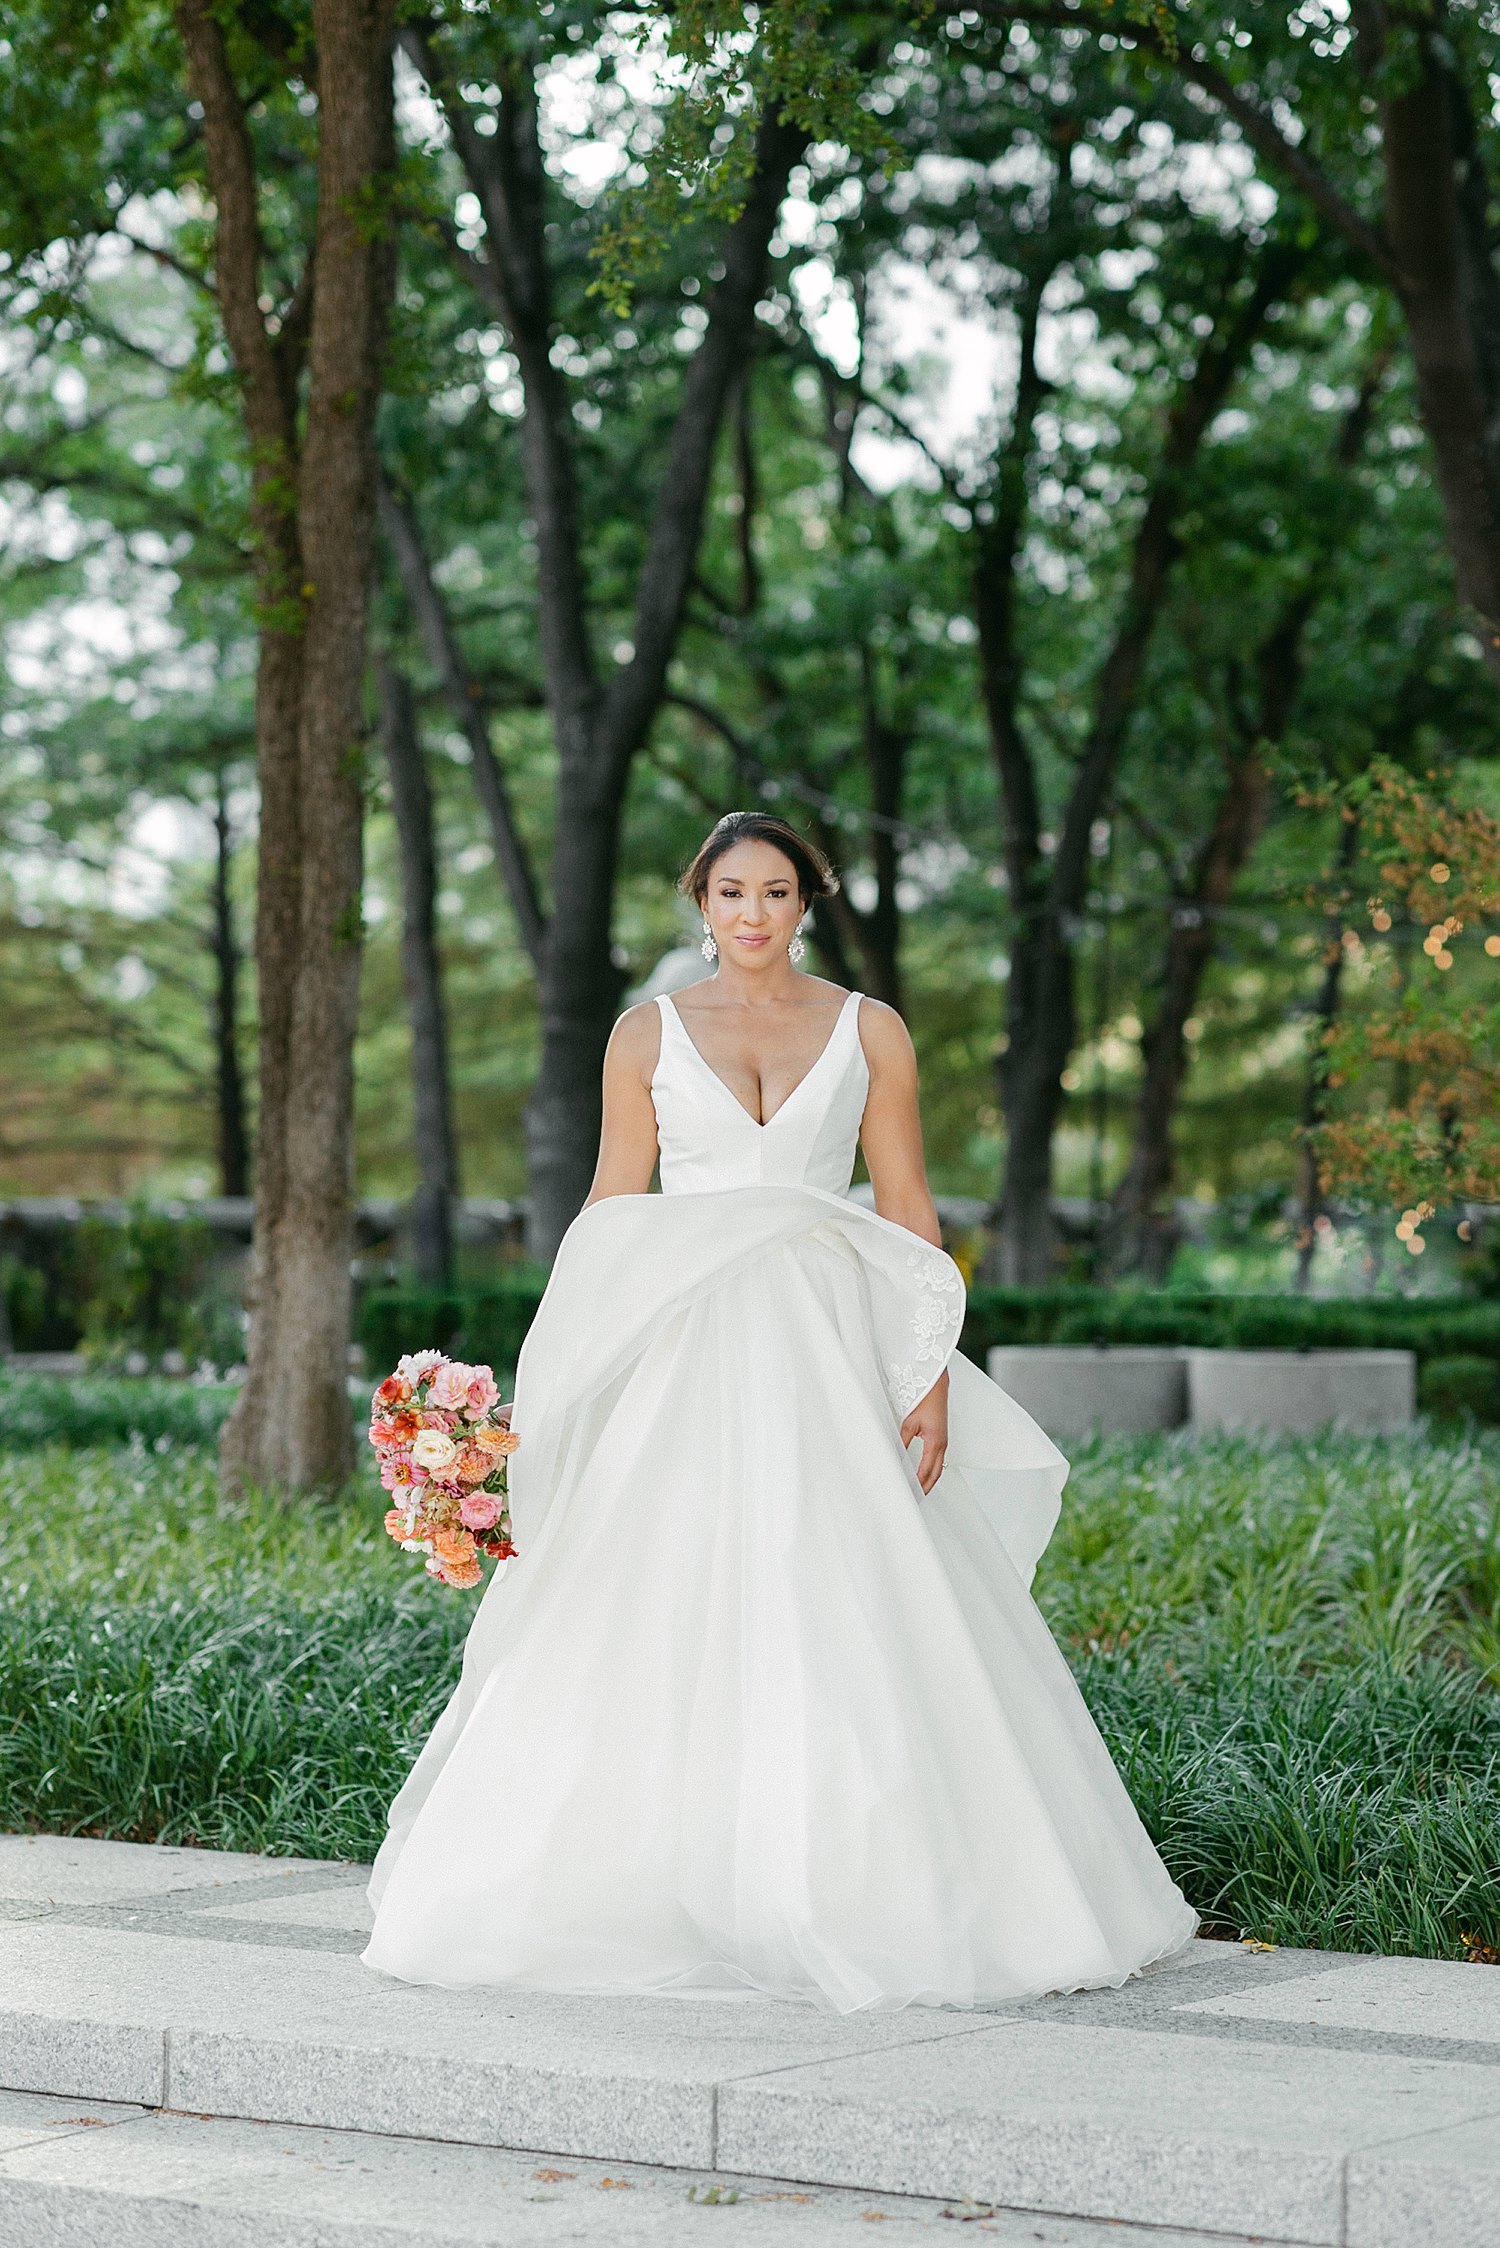 Bride in white wedding dress holding colorful floral bouquet outside in green garden